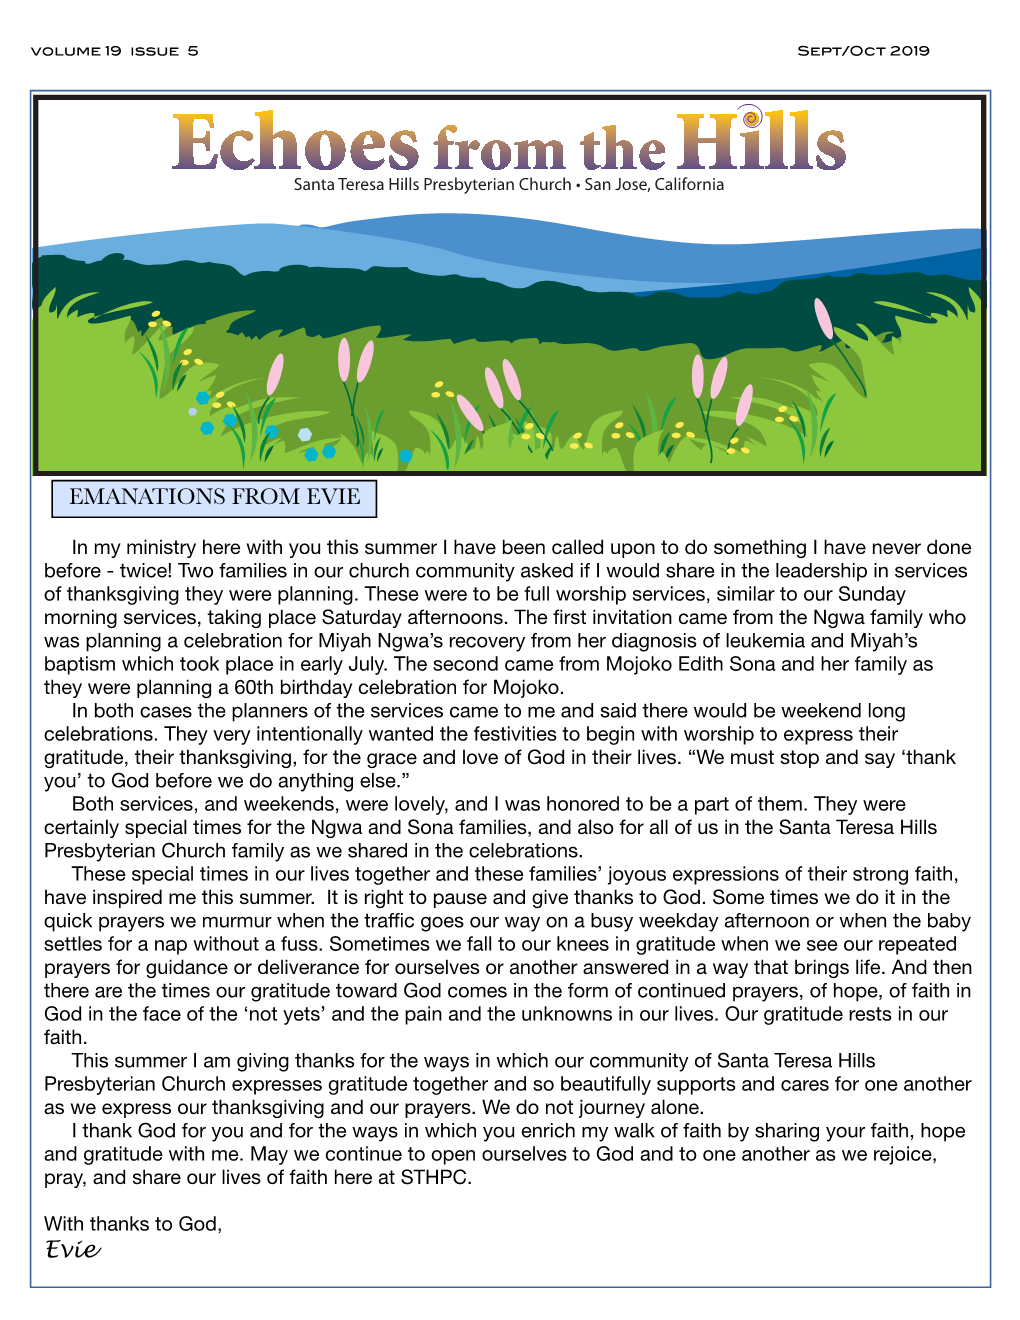 Sept/Oct 2019 Echoes Email